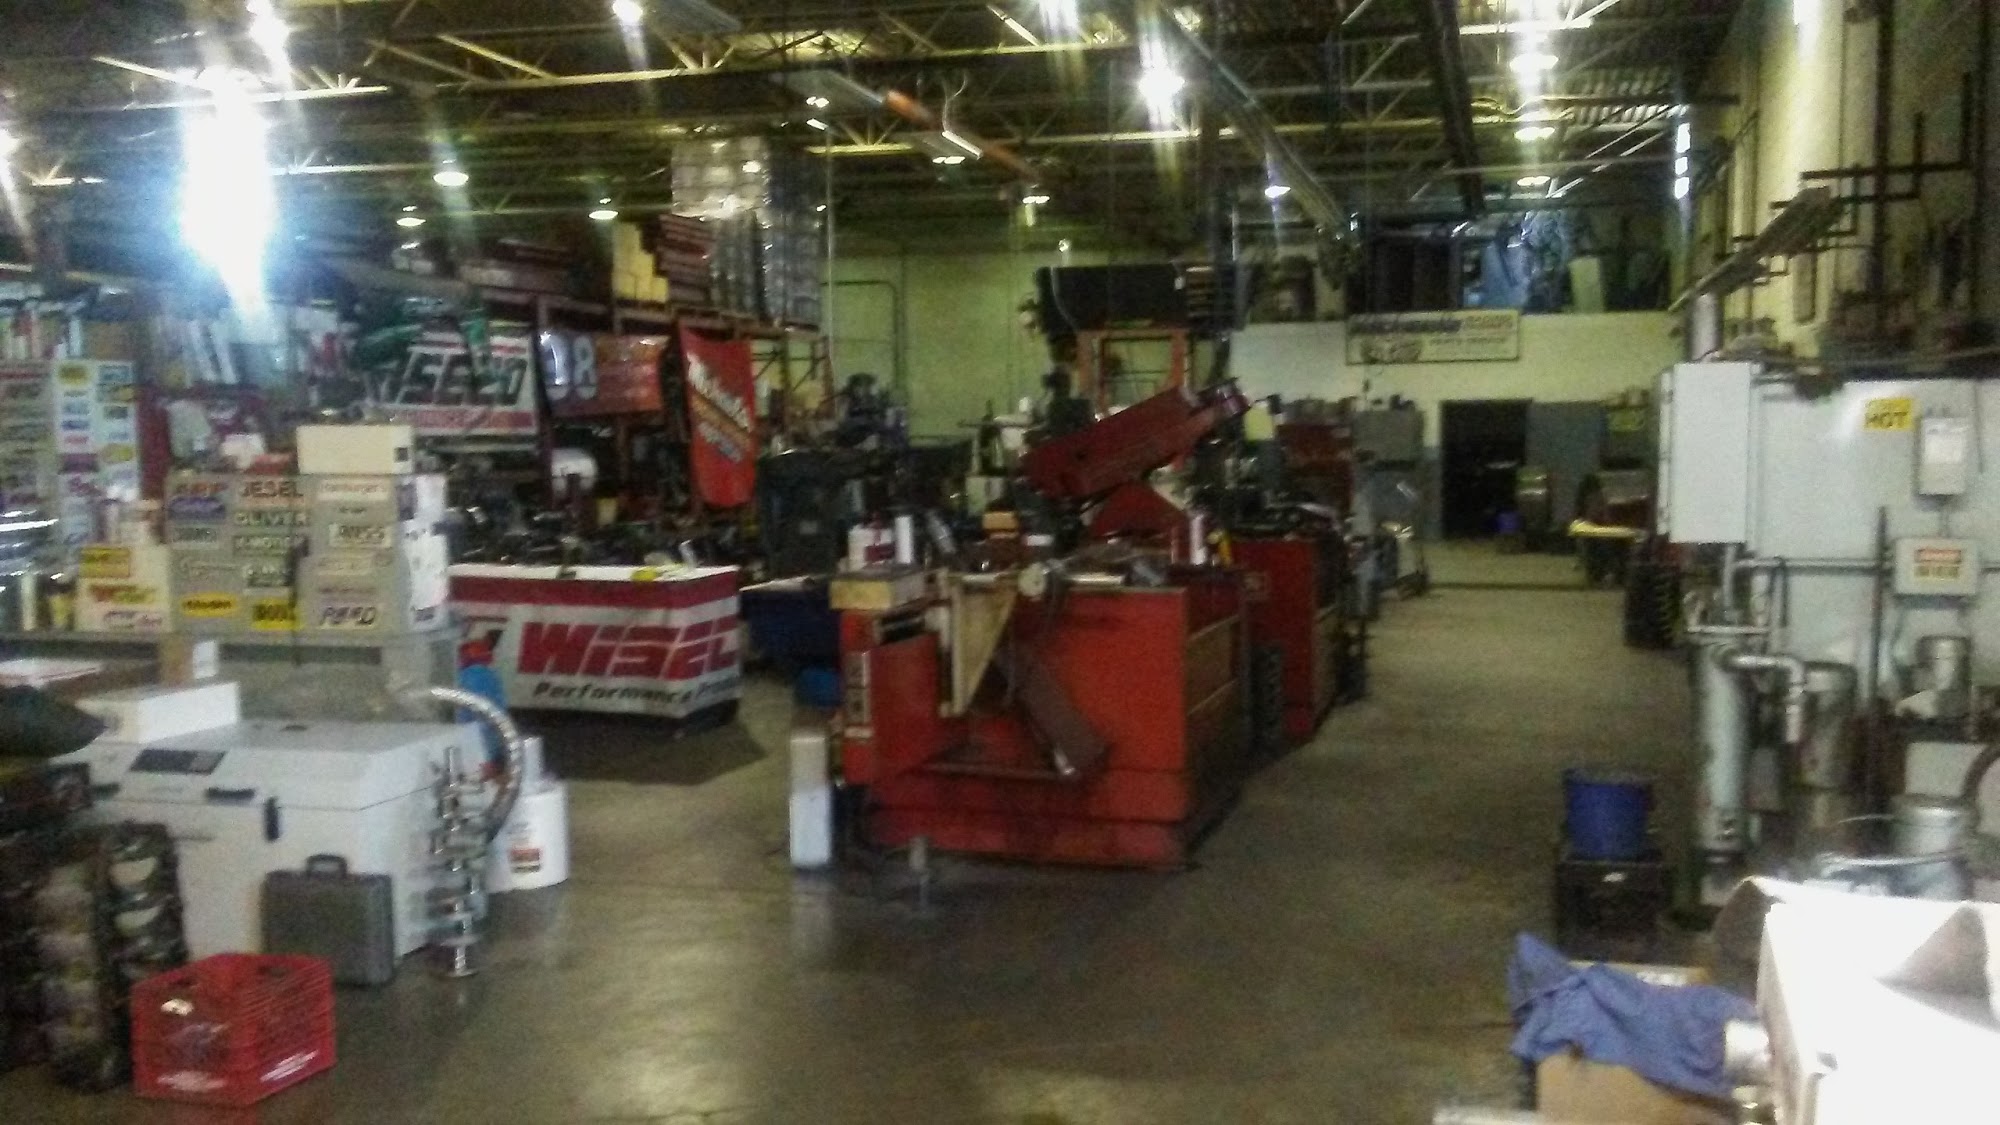 Michael's Auto Parts and Michael's Racing Engines